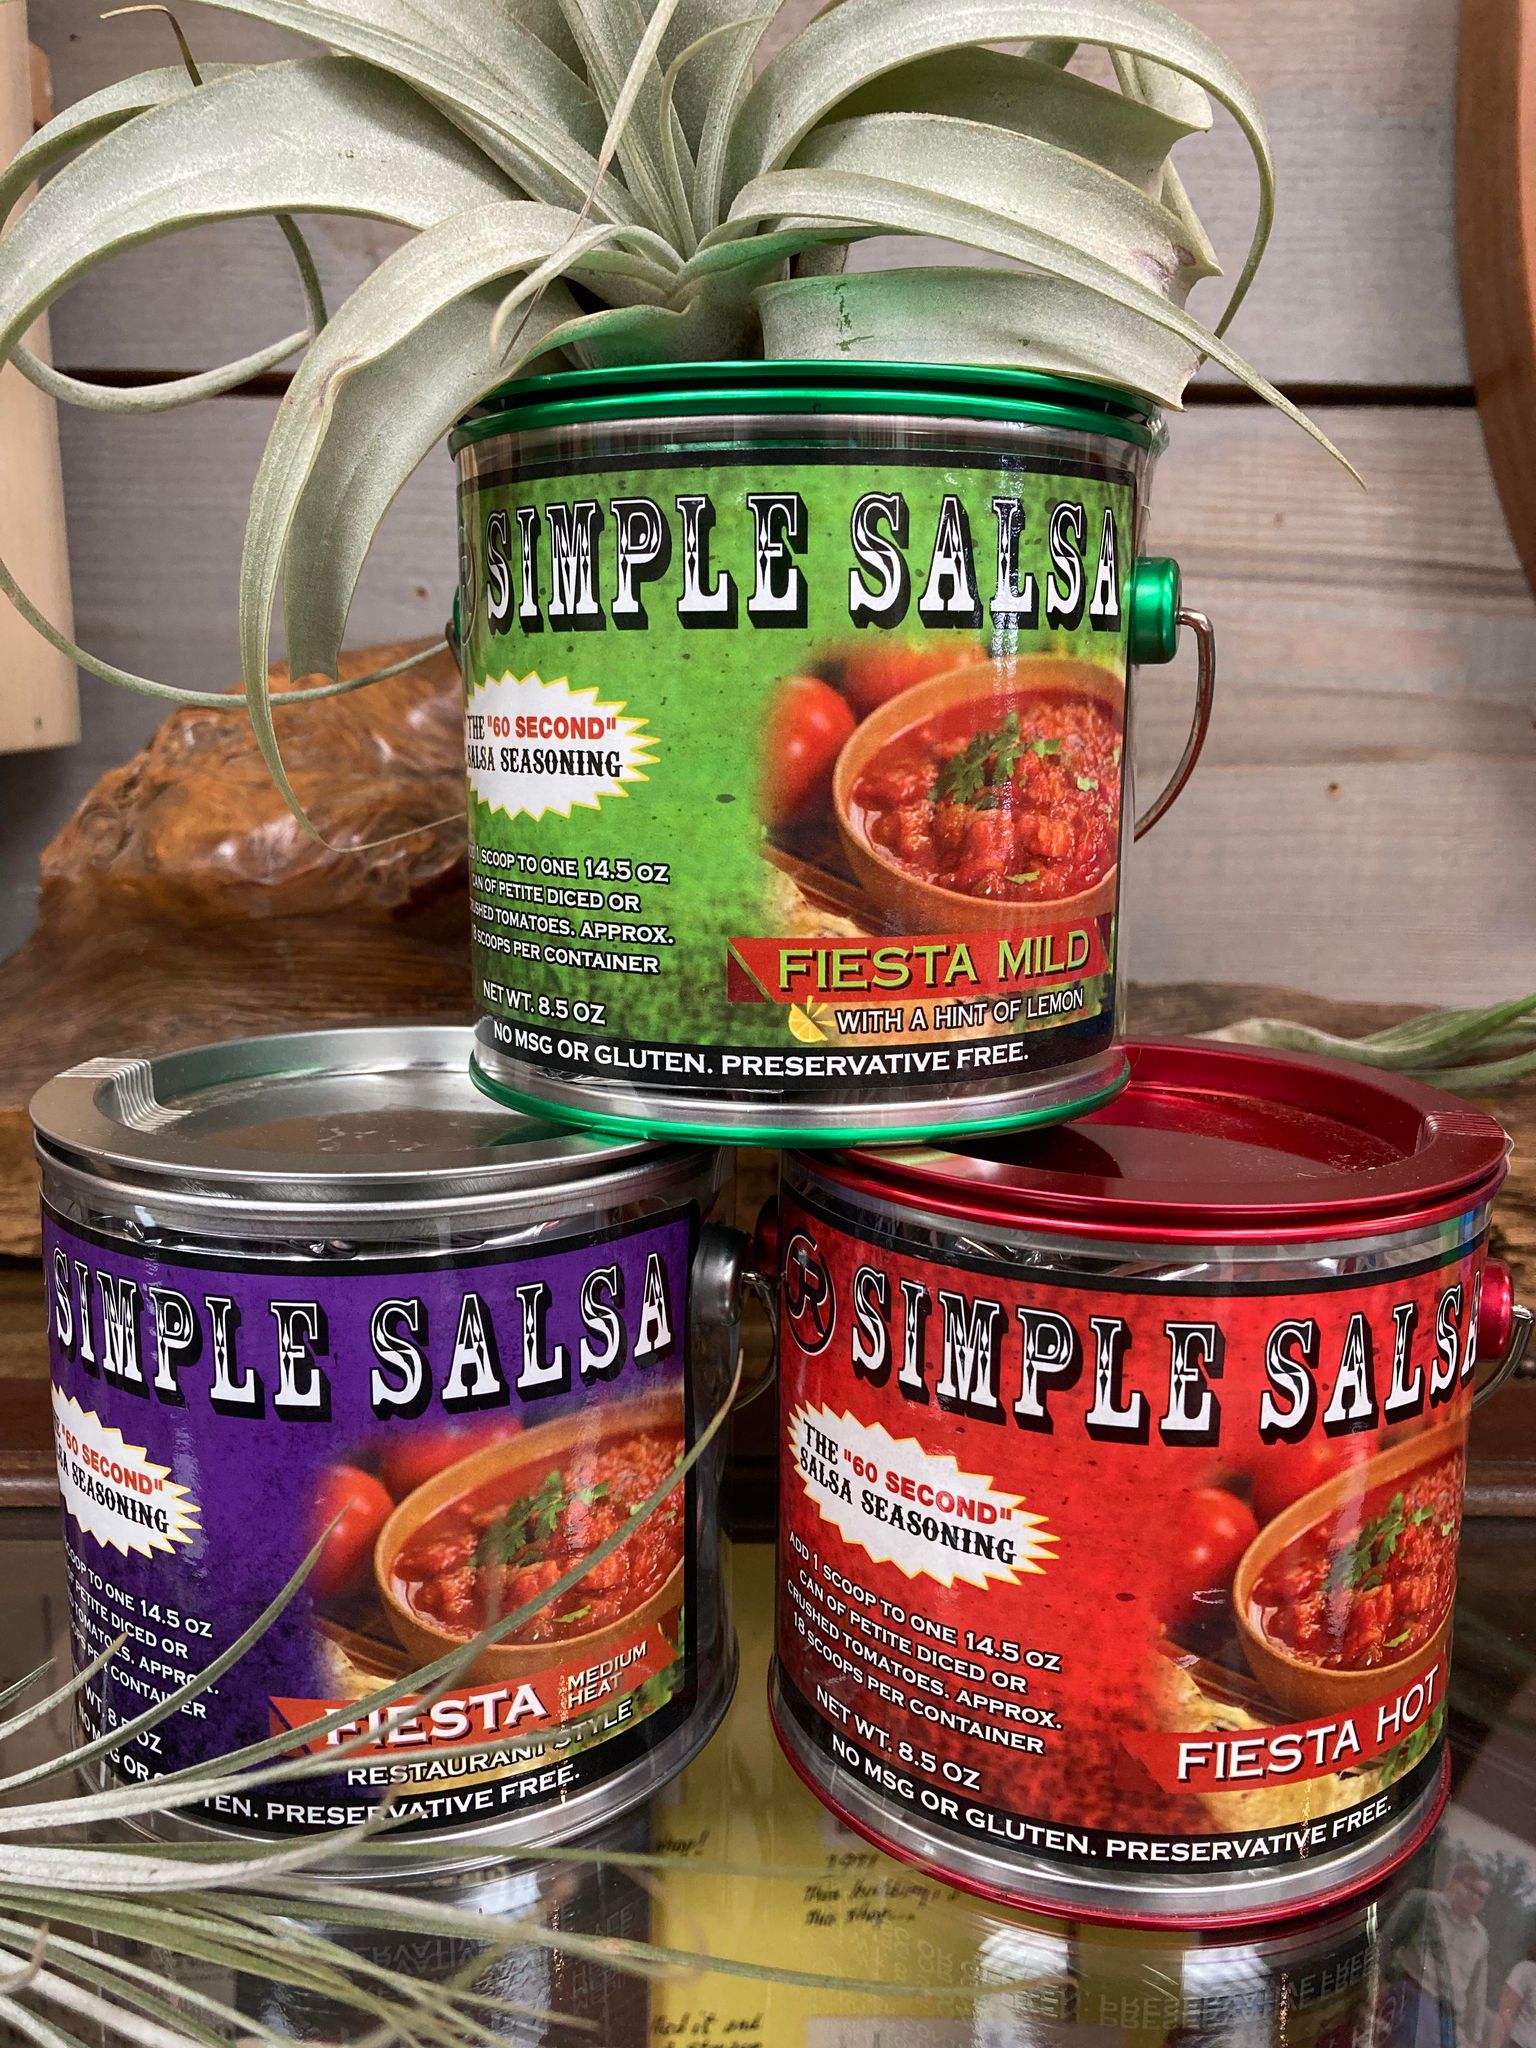 Three colorful cans of Simple Salsa with a plant on top of the uppermost can, arranged on a wooden surface.